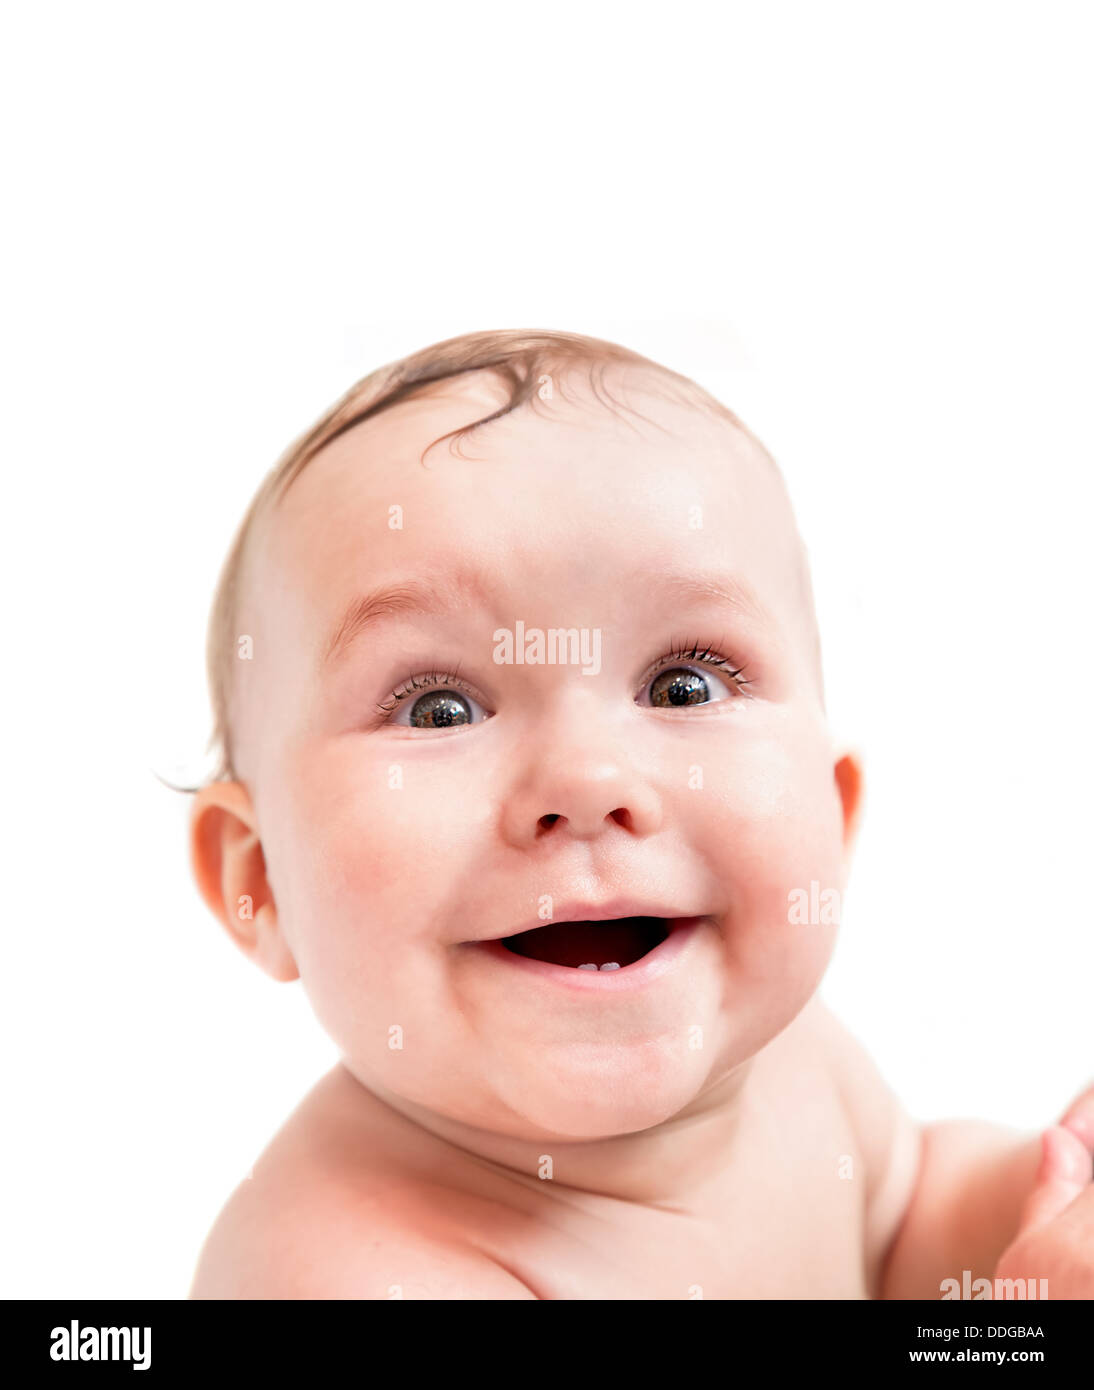 Cute happy baby laughing Stock Photo